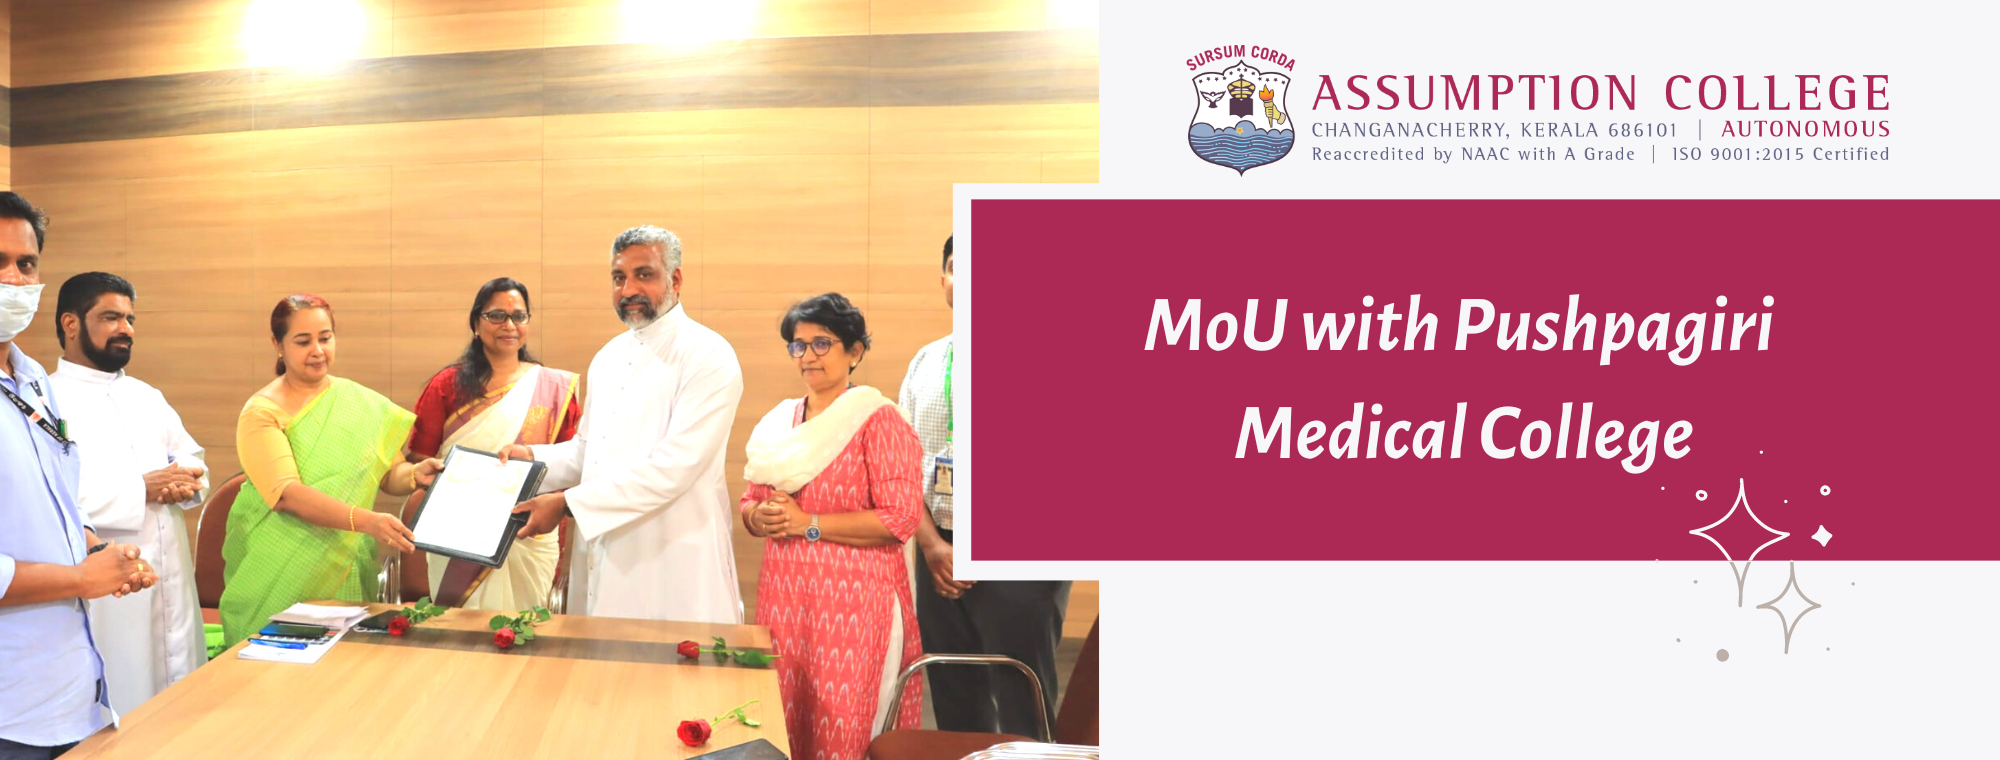 MoU with Pushpagiri Medical College